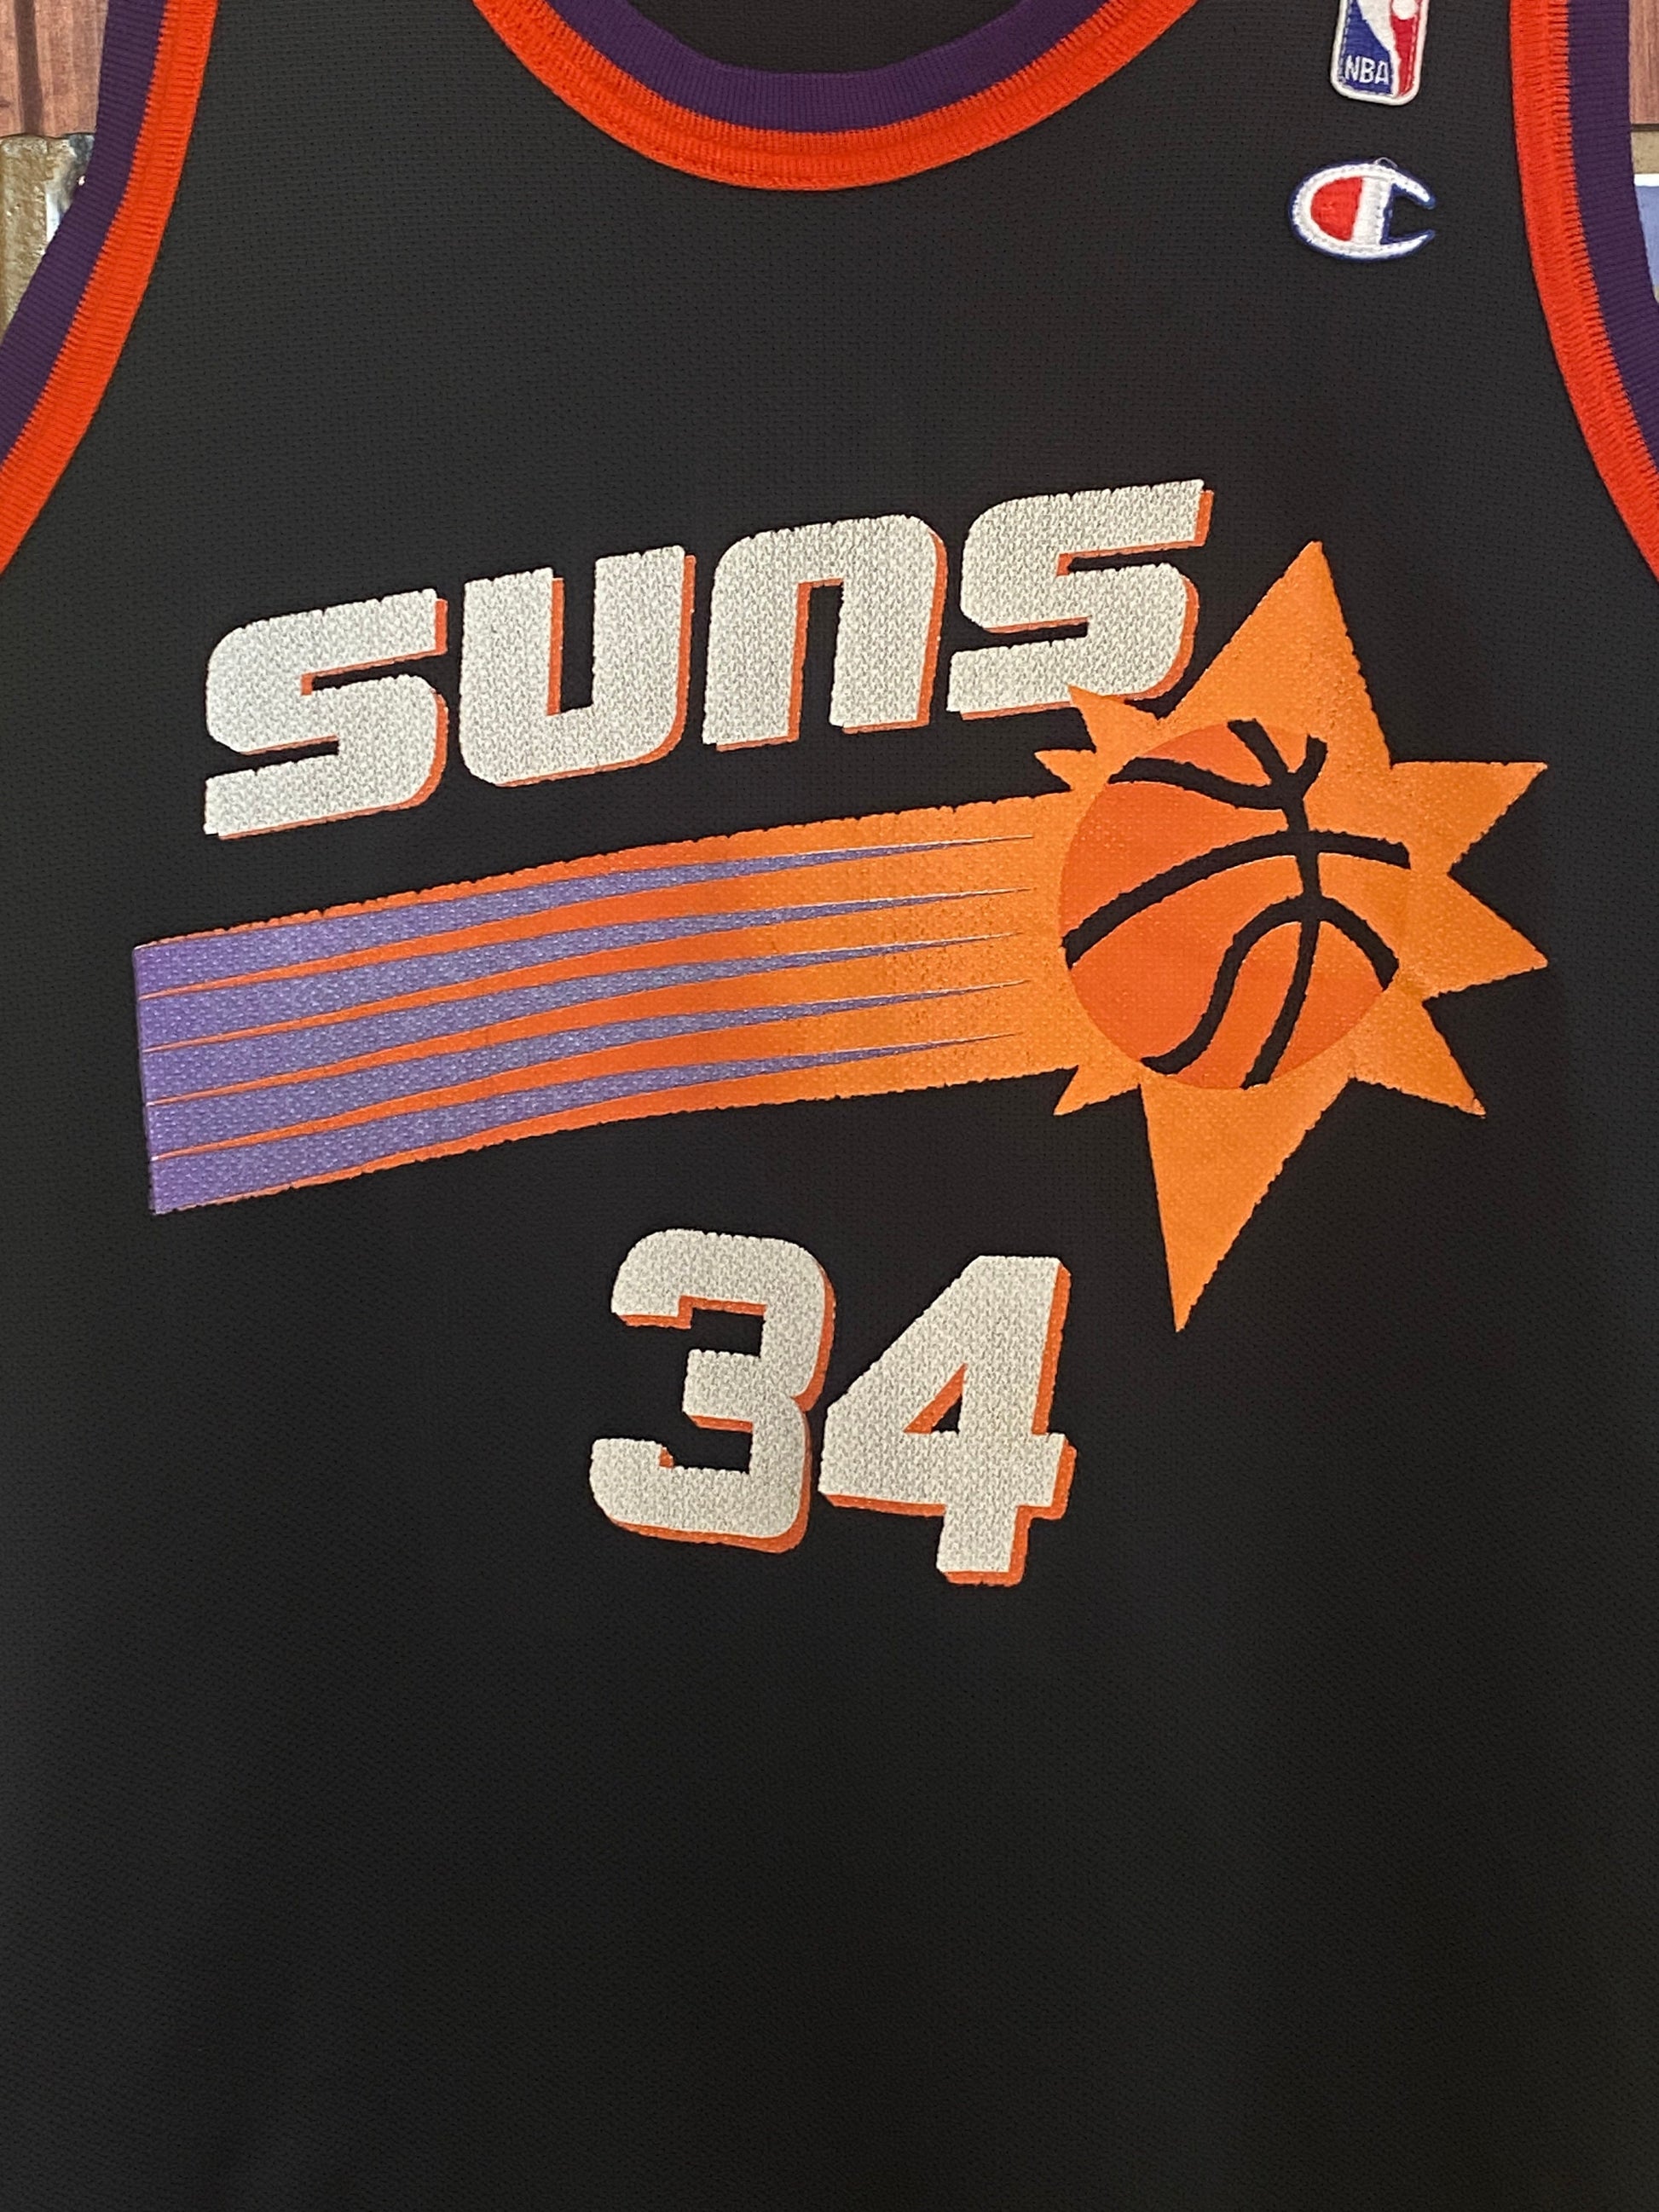 Vintage 90s NBA Phoenix Suns Charles Barkley #34 jersey, size 44 - front view. Made by Champion.